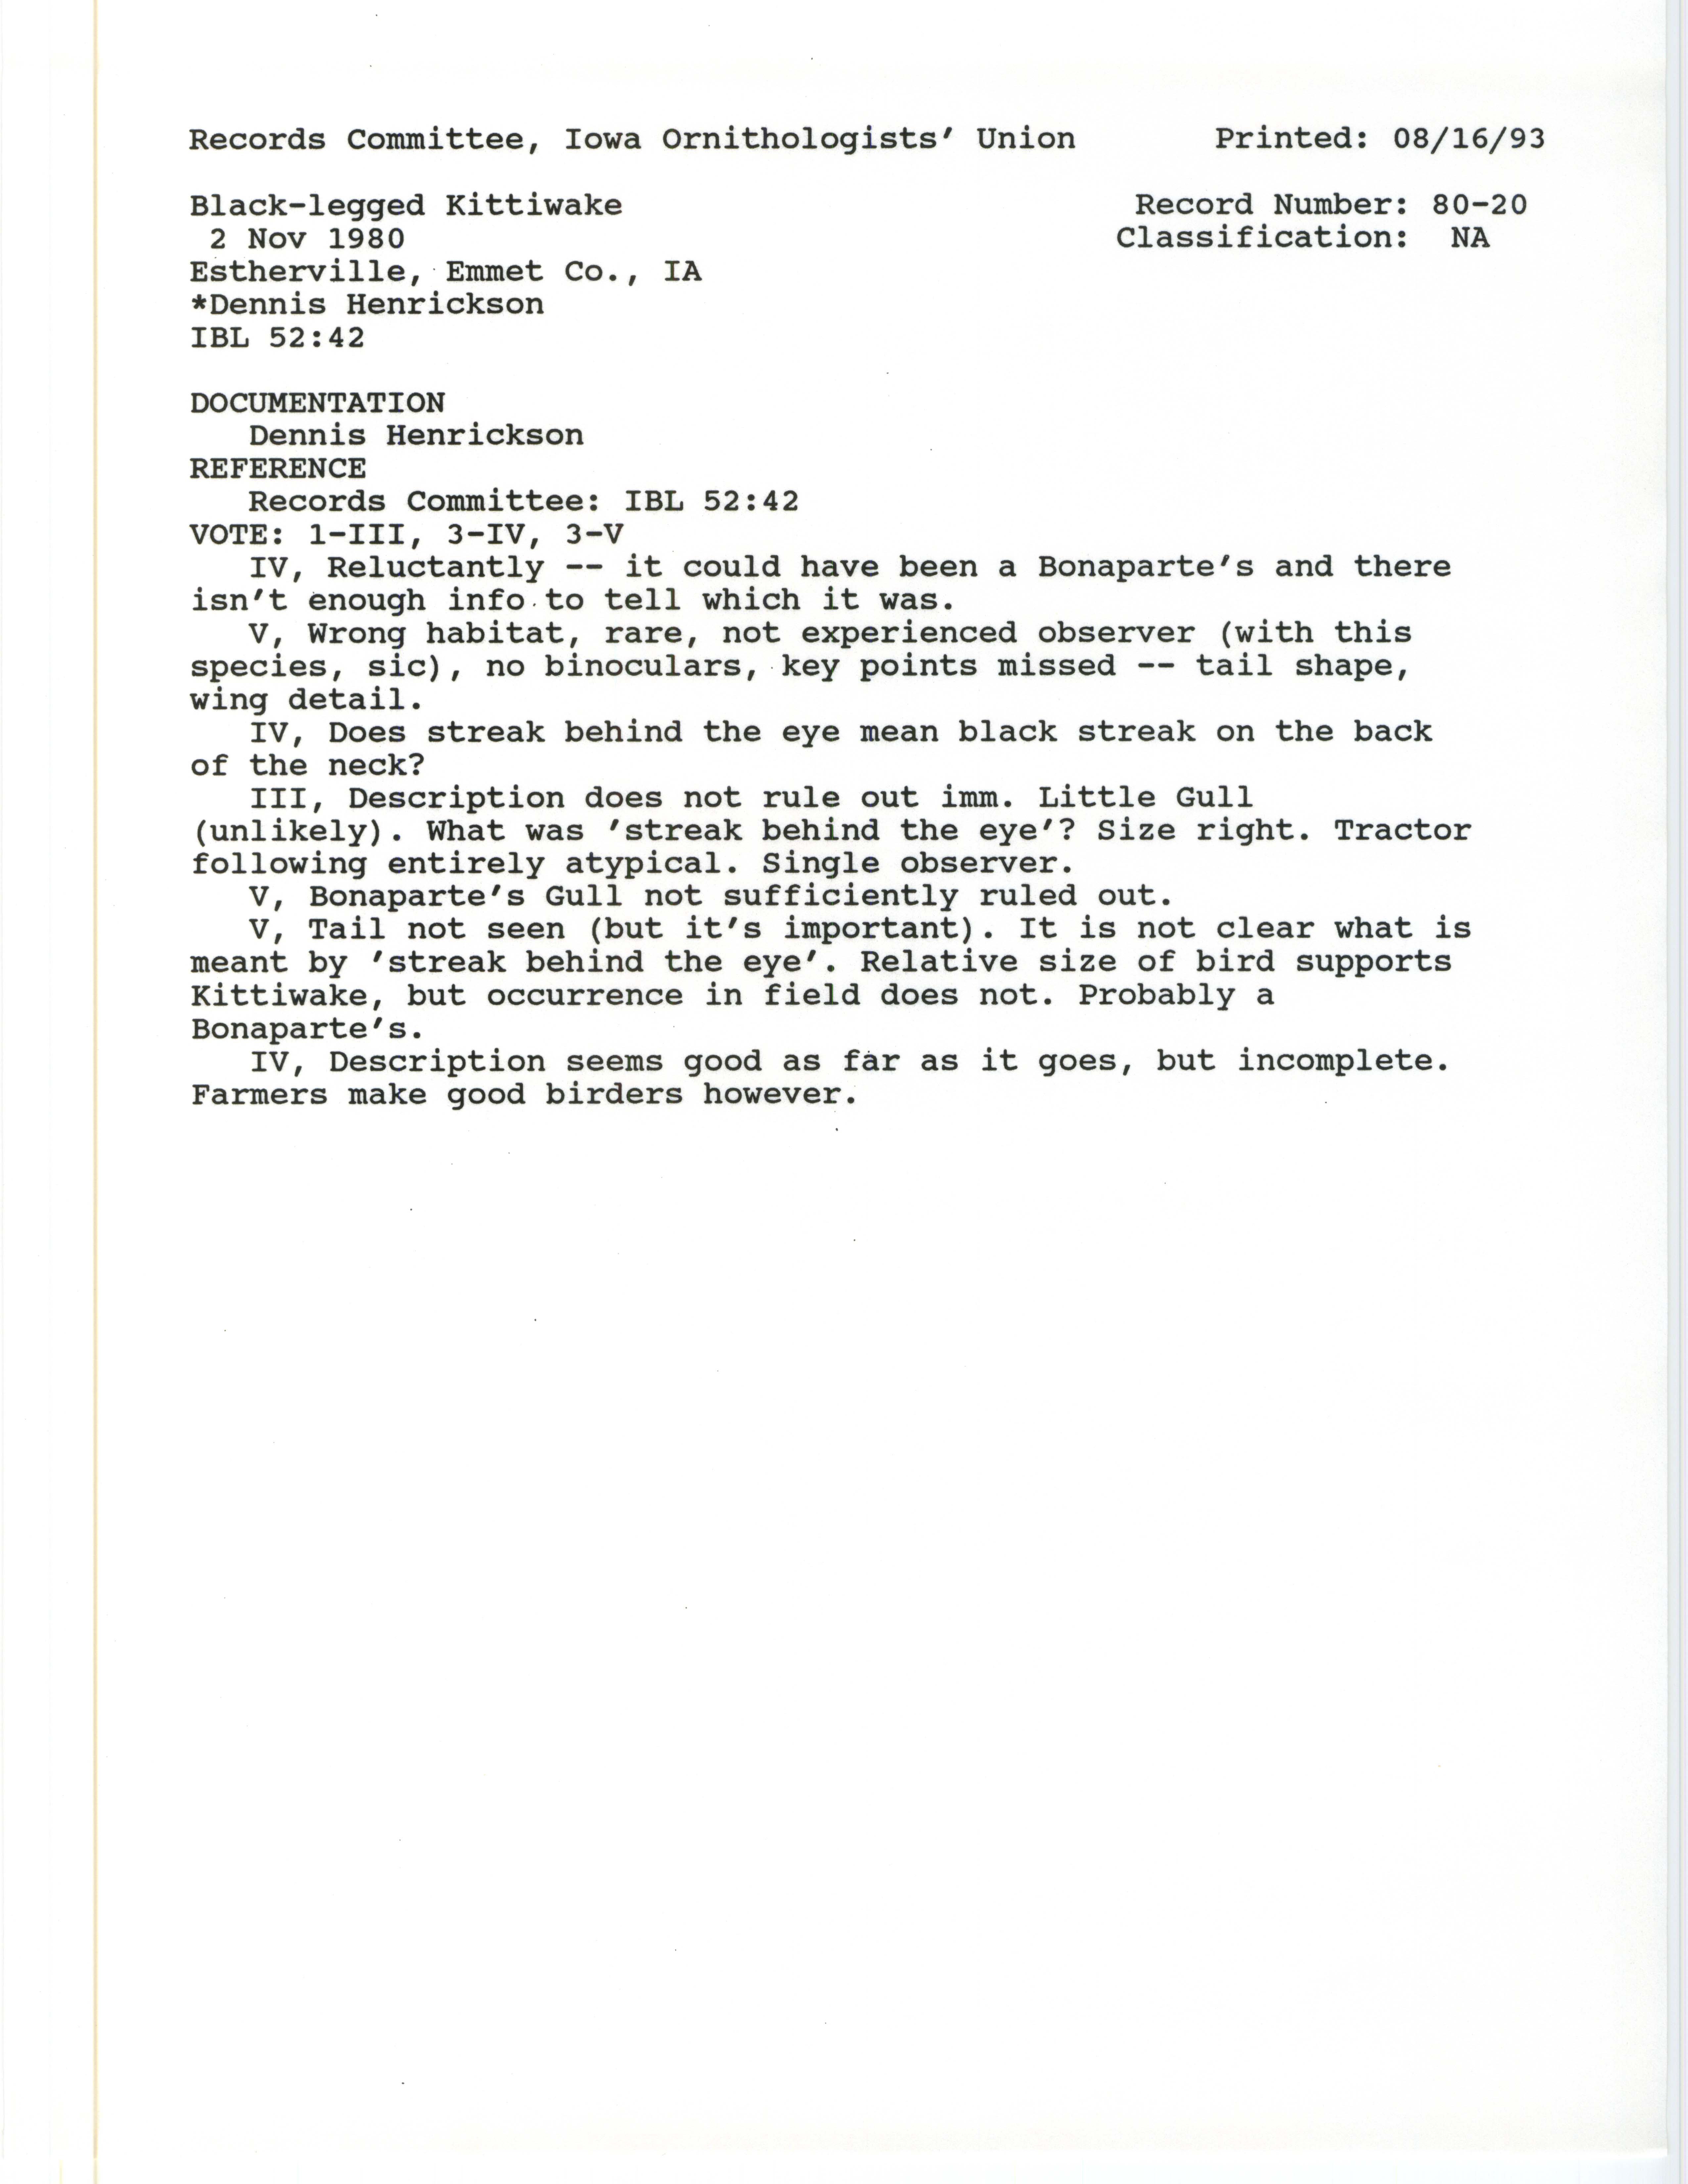 Records Committee review for rare bird sighting for Black-legged Kittiwake at Estherville, 1980